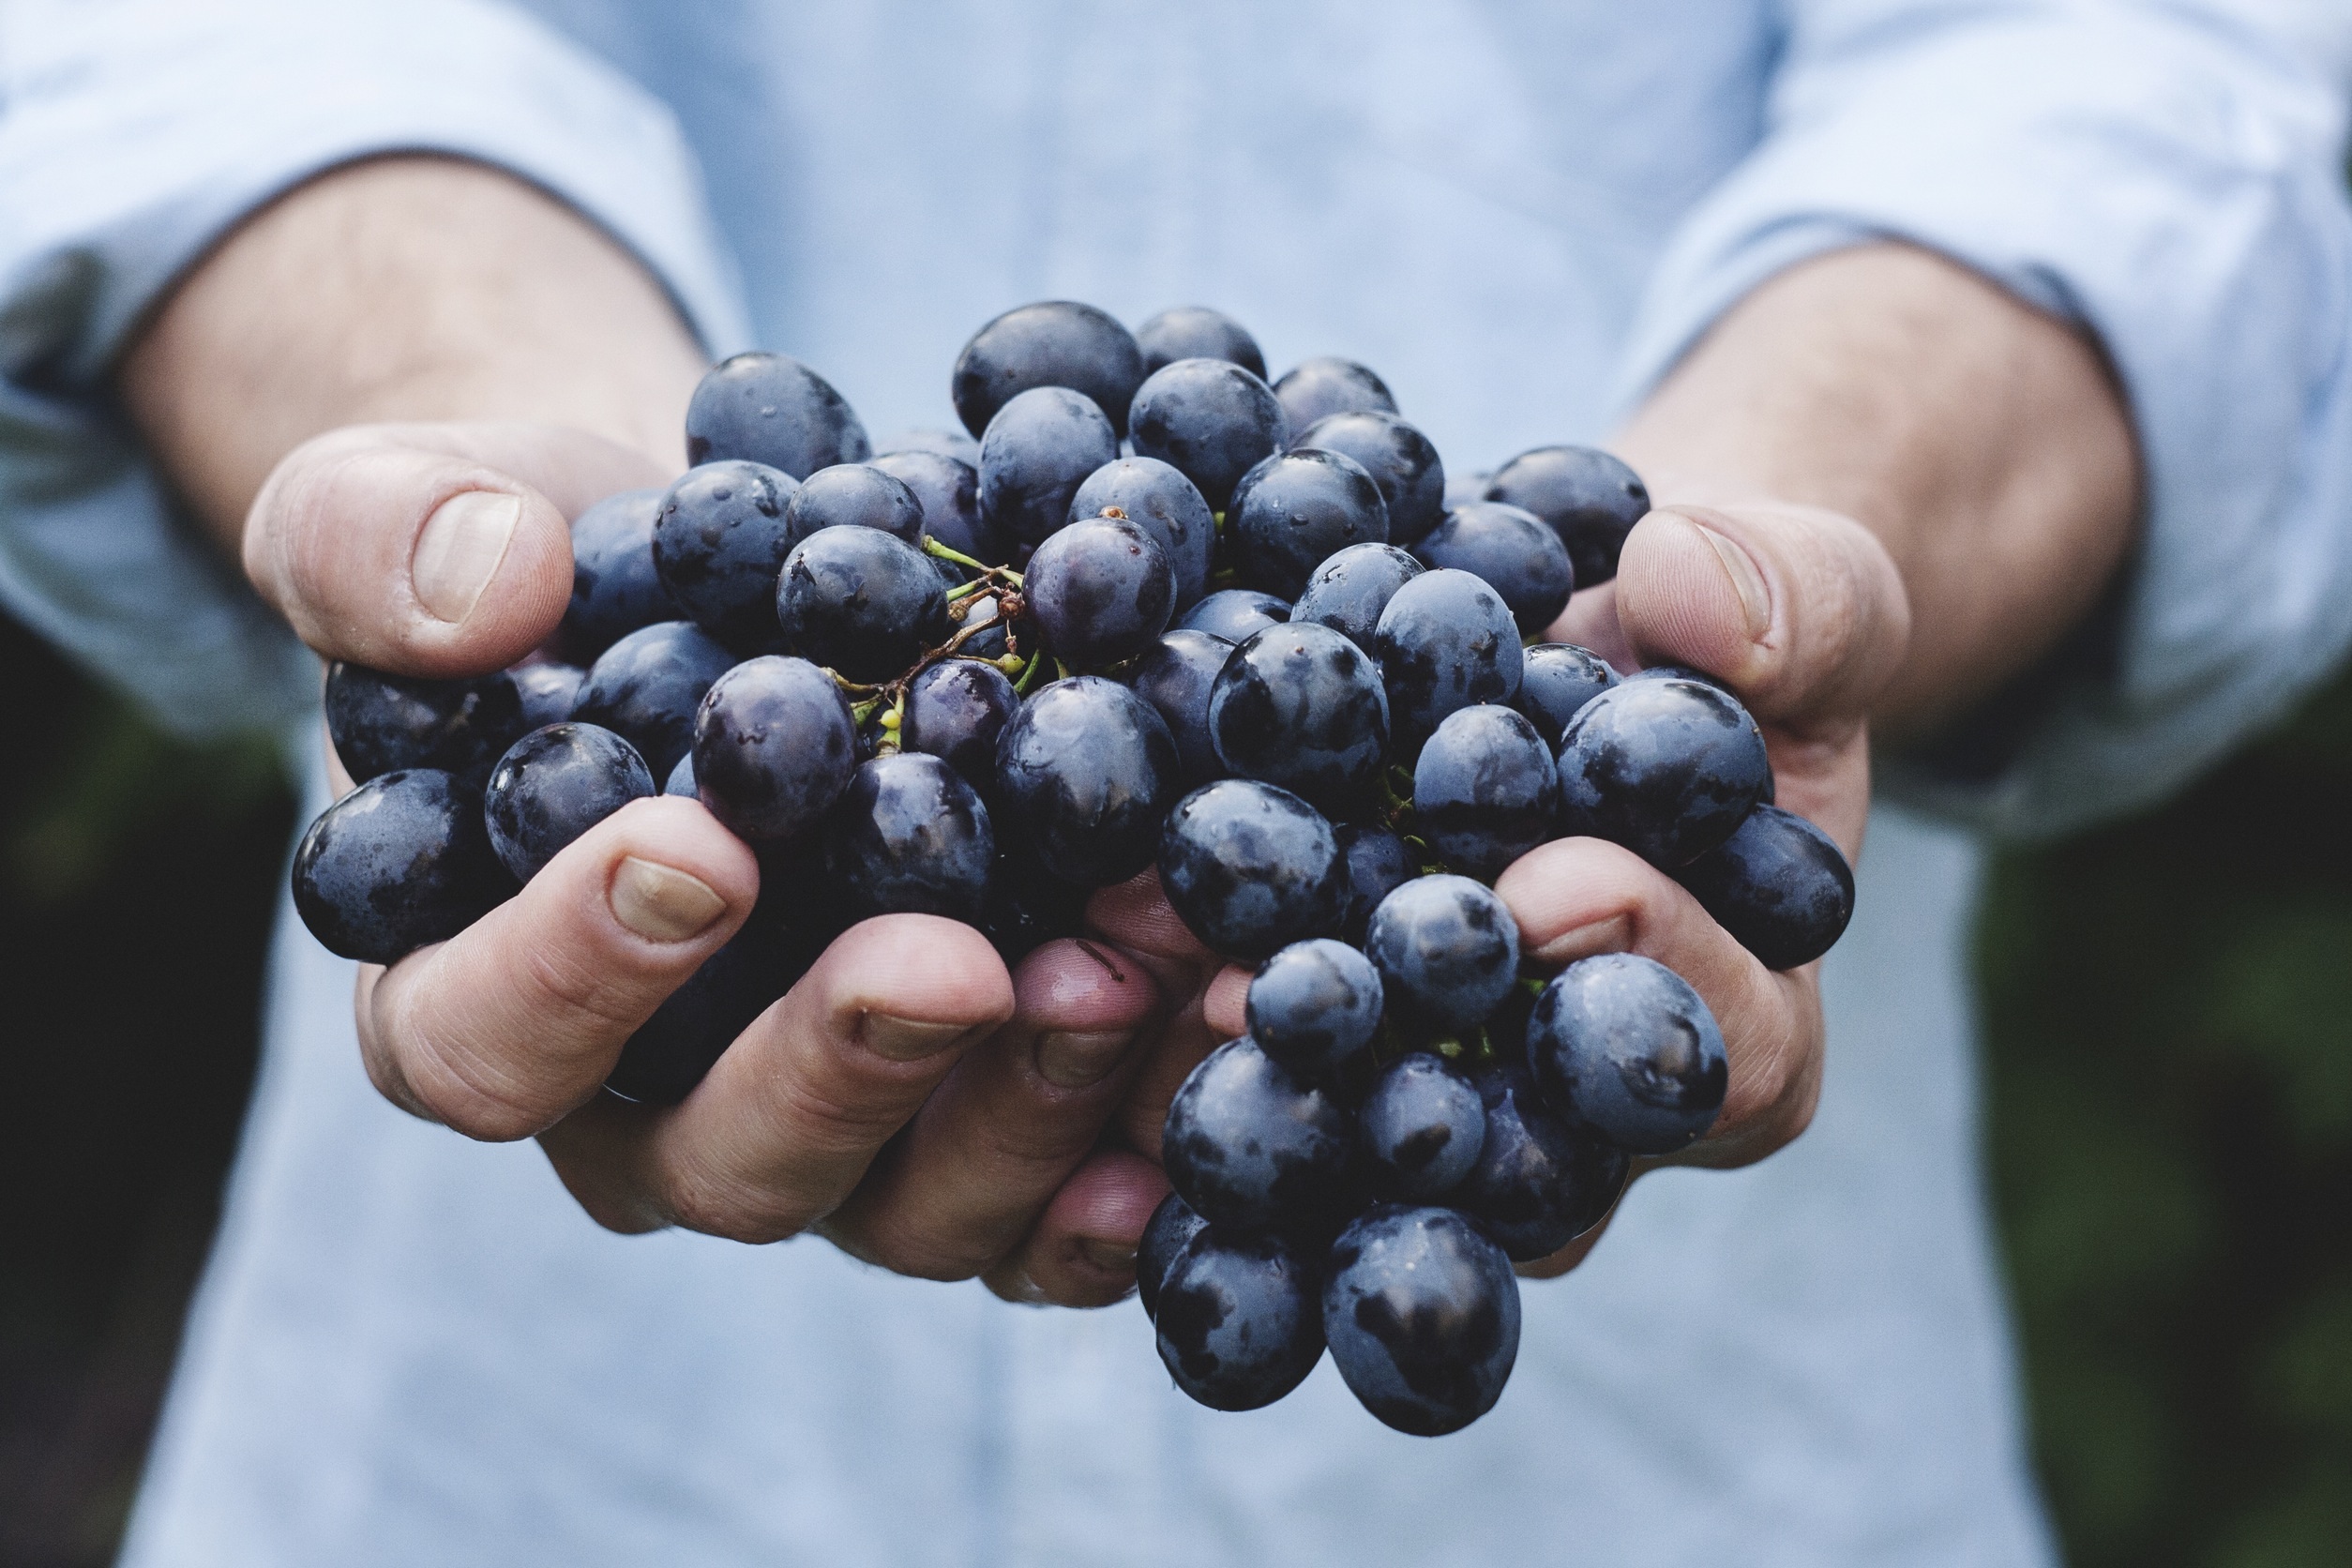 143089 download wallpaper grapes, food, hands, ripe, bunch, bundle screensavers and pictures for free